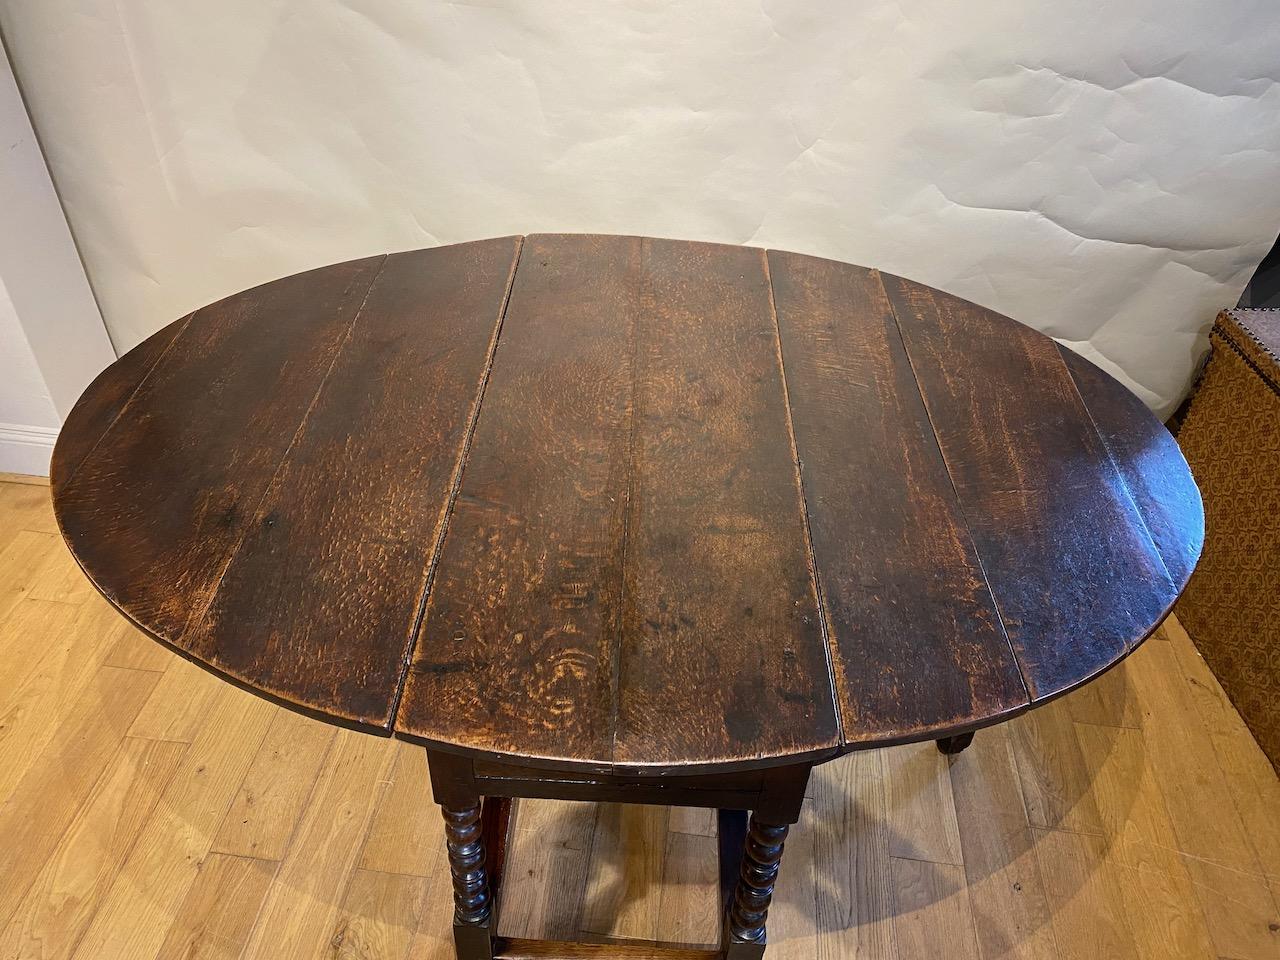 William and Mary Gate Leg Table